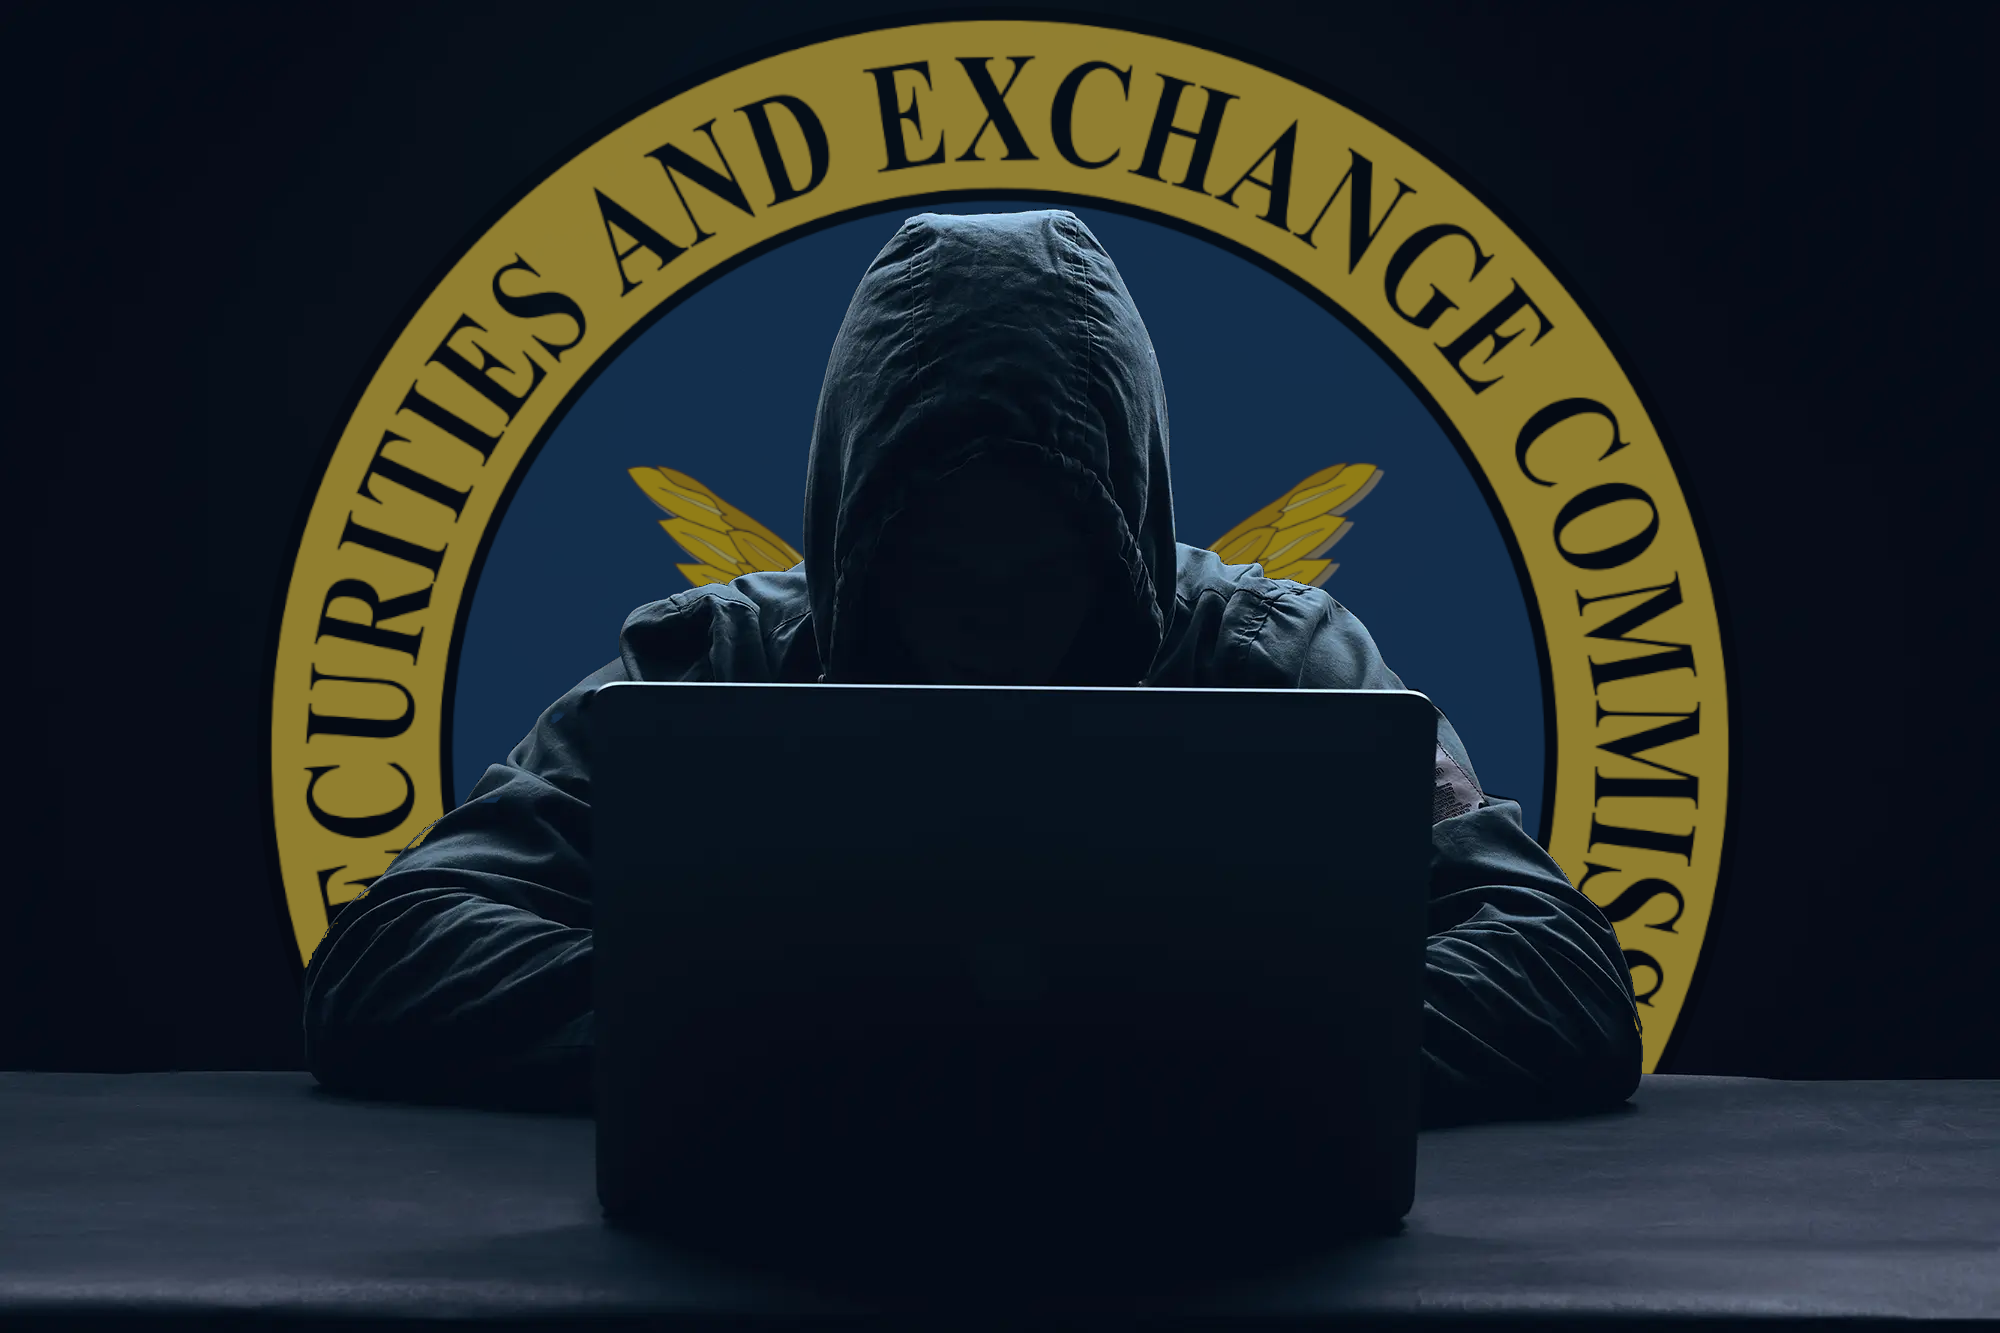 U.S. Securities and Exchange Commission X account hacked – Notebookcheck.net